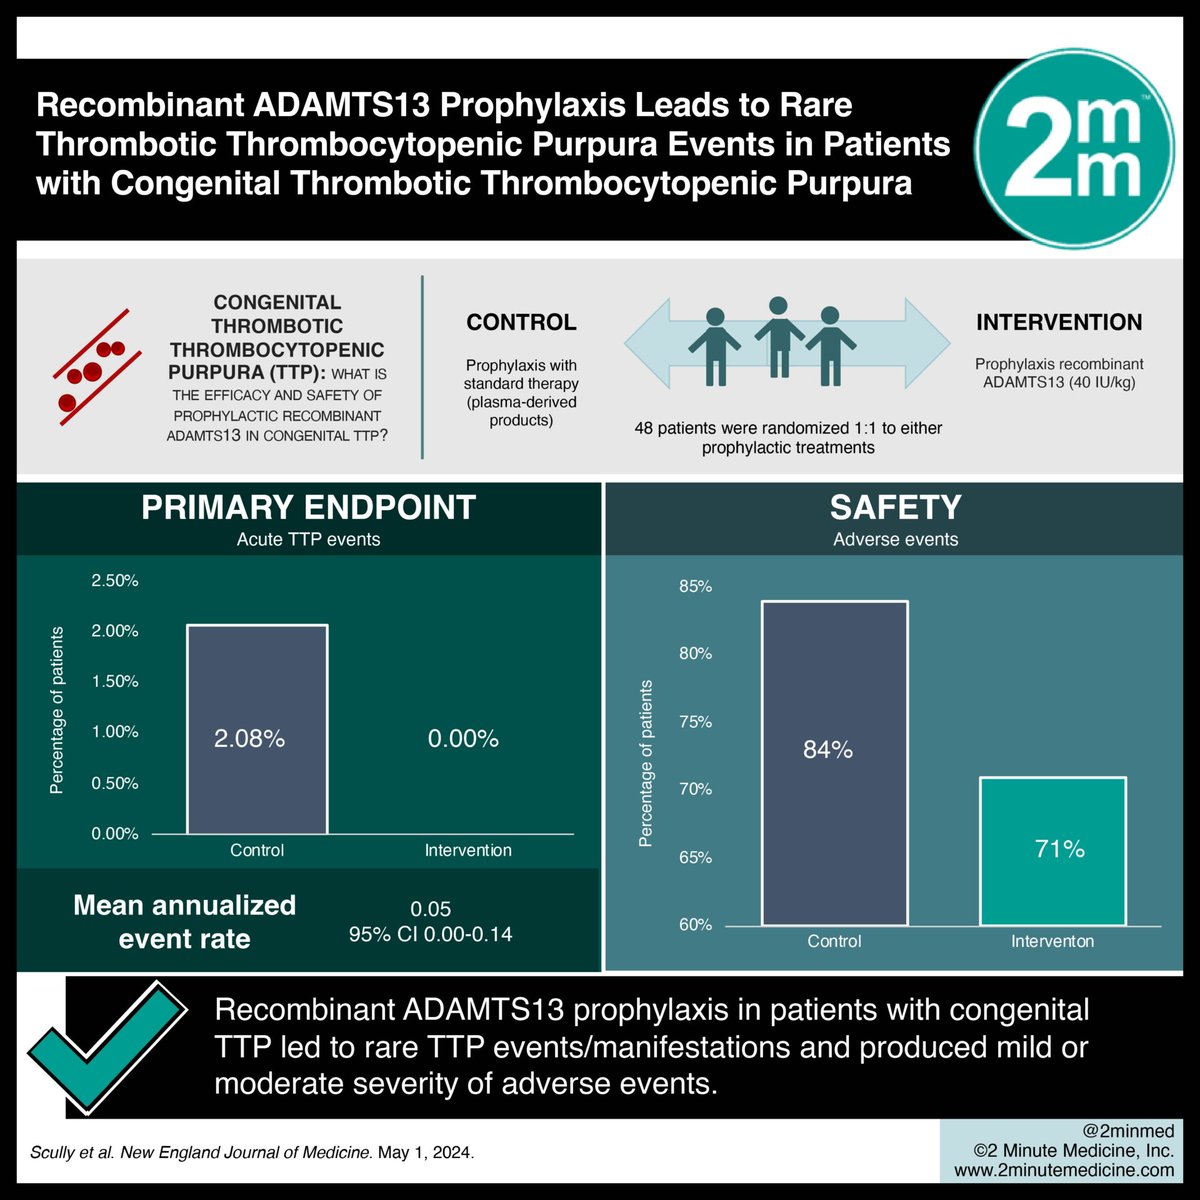 #VisualAbstract: Recombinant ADAMTS13 Prophylaxis Leads to Rare Thrombotic Thrombocytopenic Purpura Events in Patients with Congenital Thrombotic Thrombocytopenic Purpura dlvr.it/T6bMcN #StudyGraphics #congenitalttp